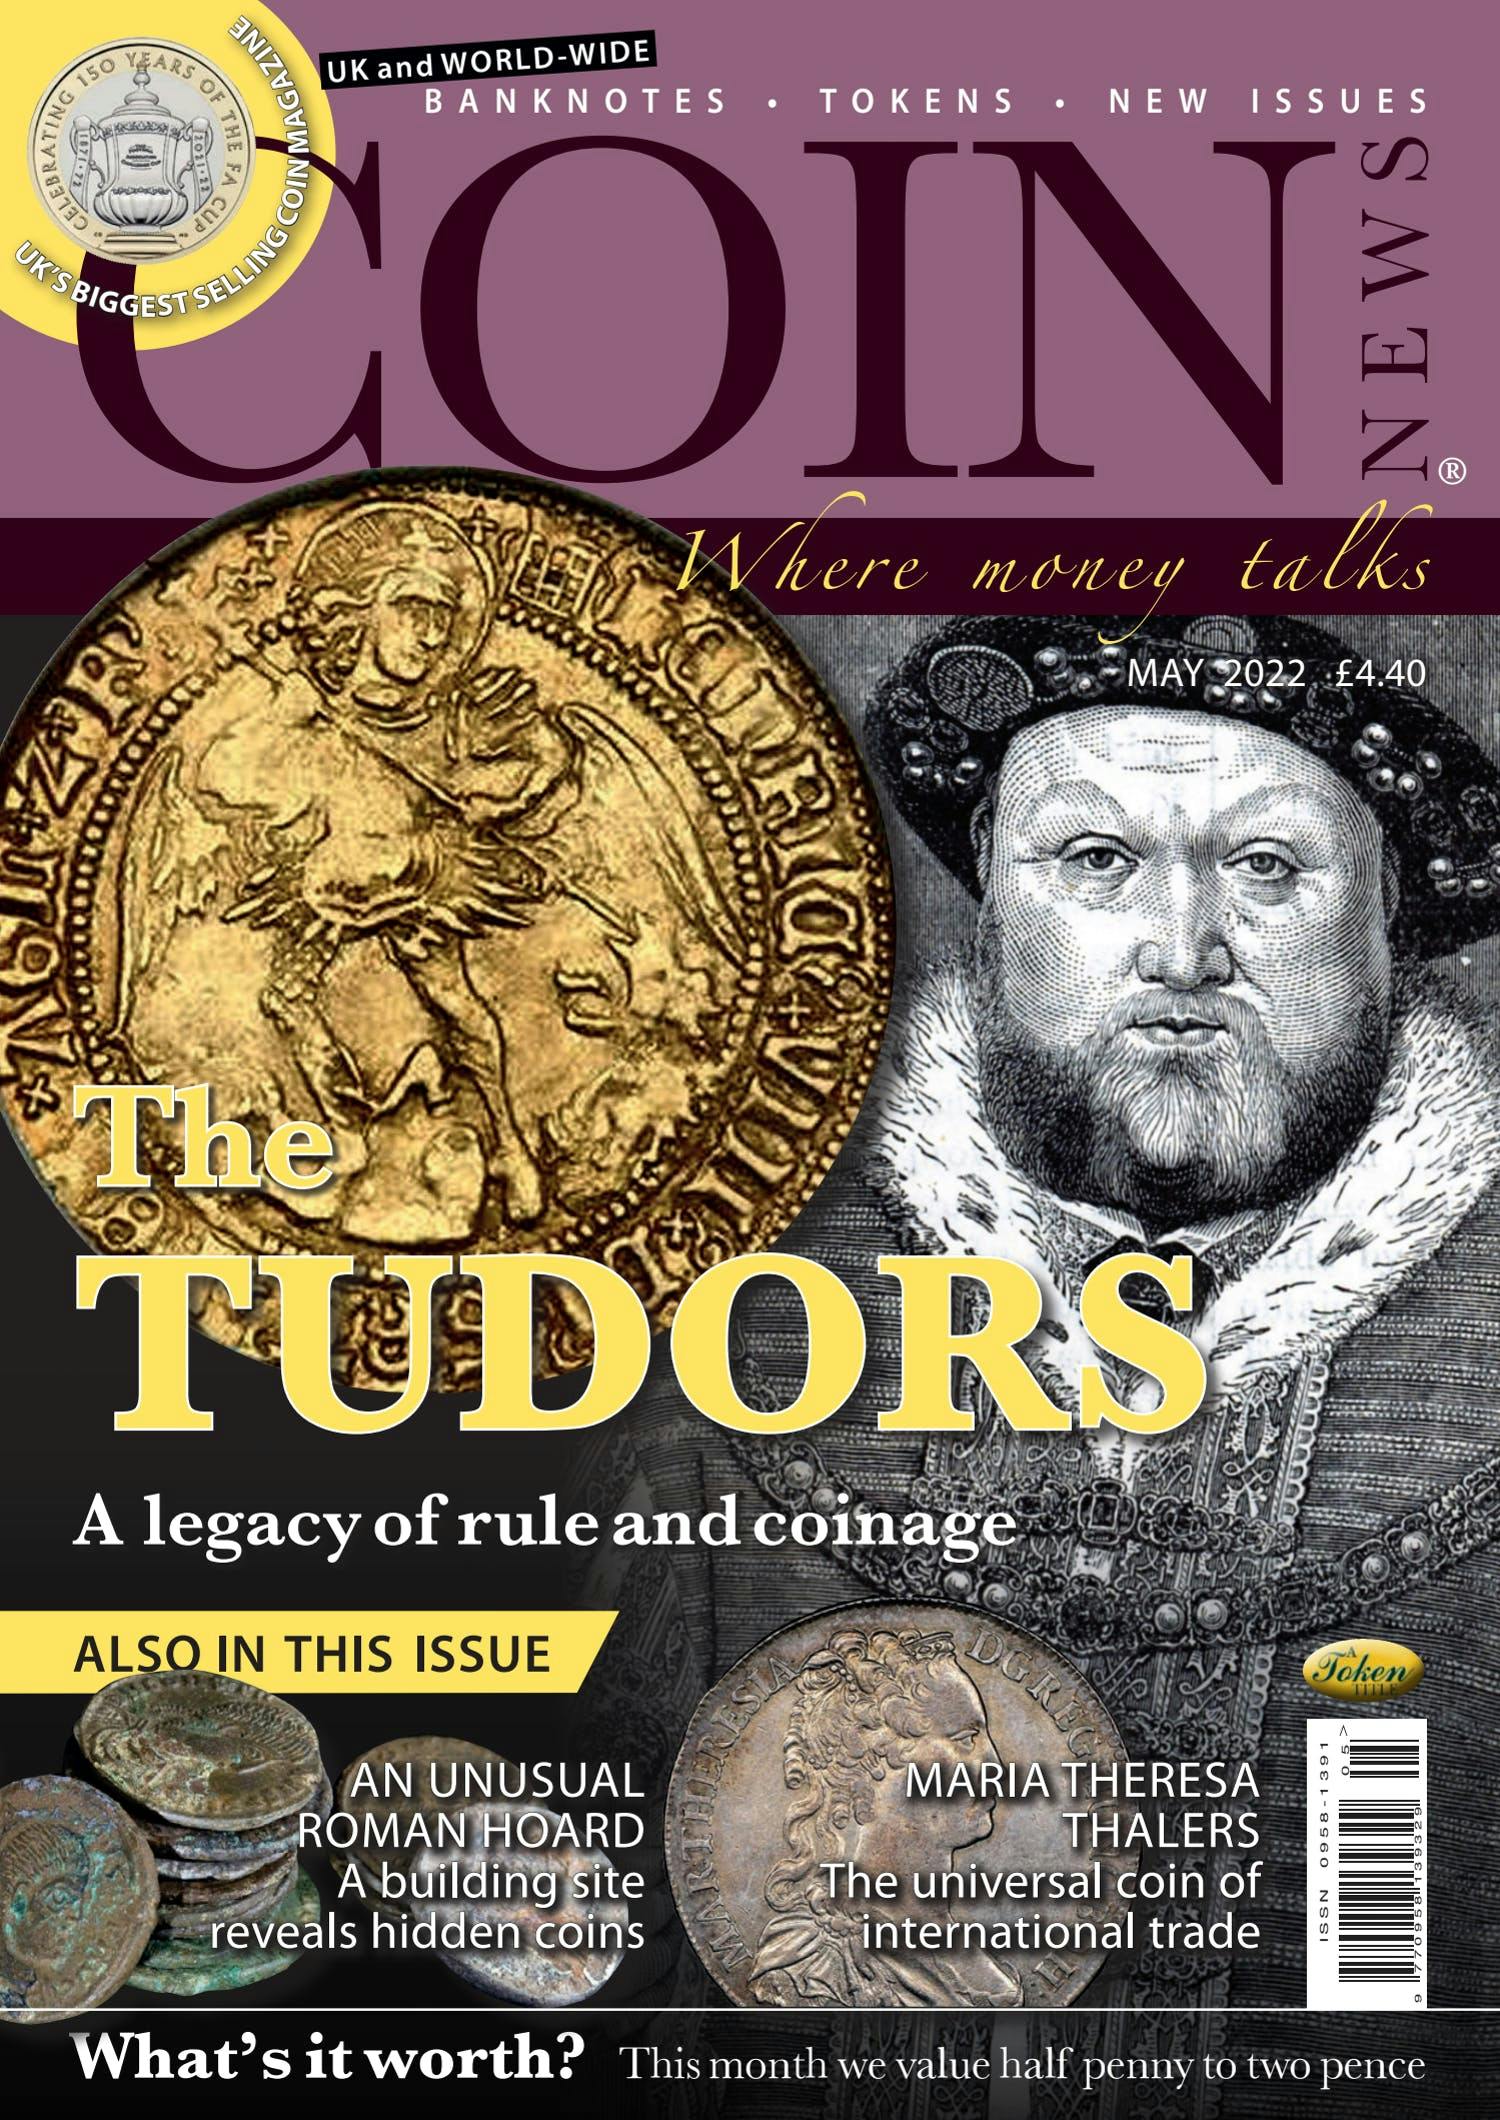 The front cover of Coin News, May 2022 - Volume 59, Number 5